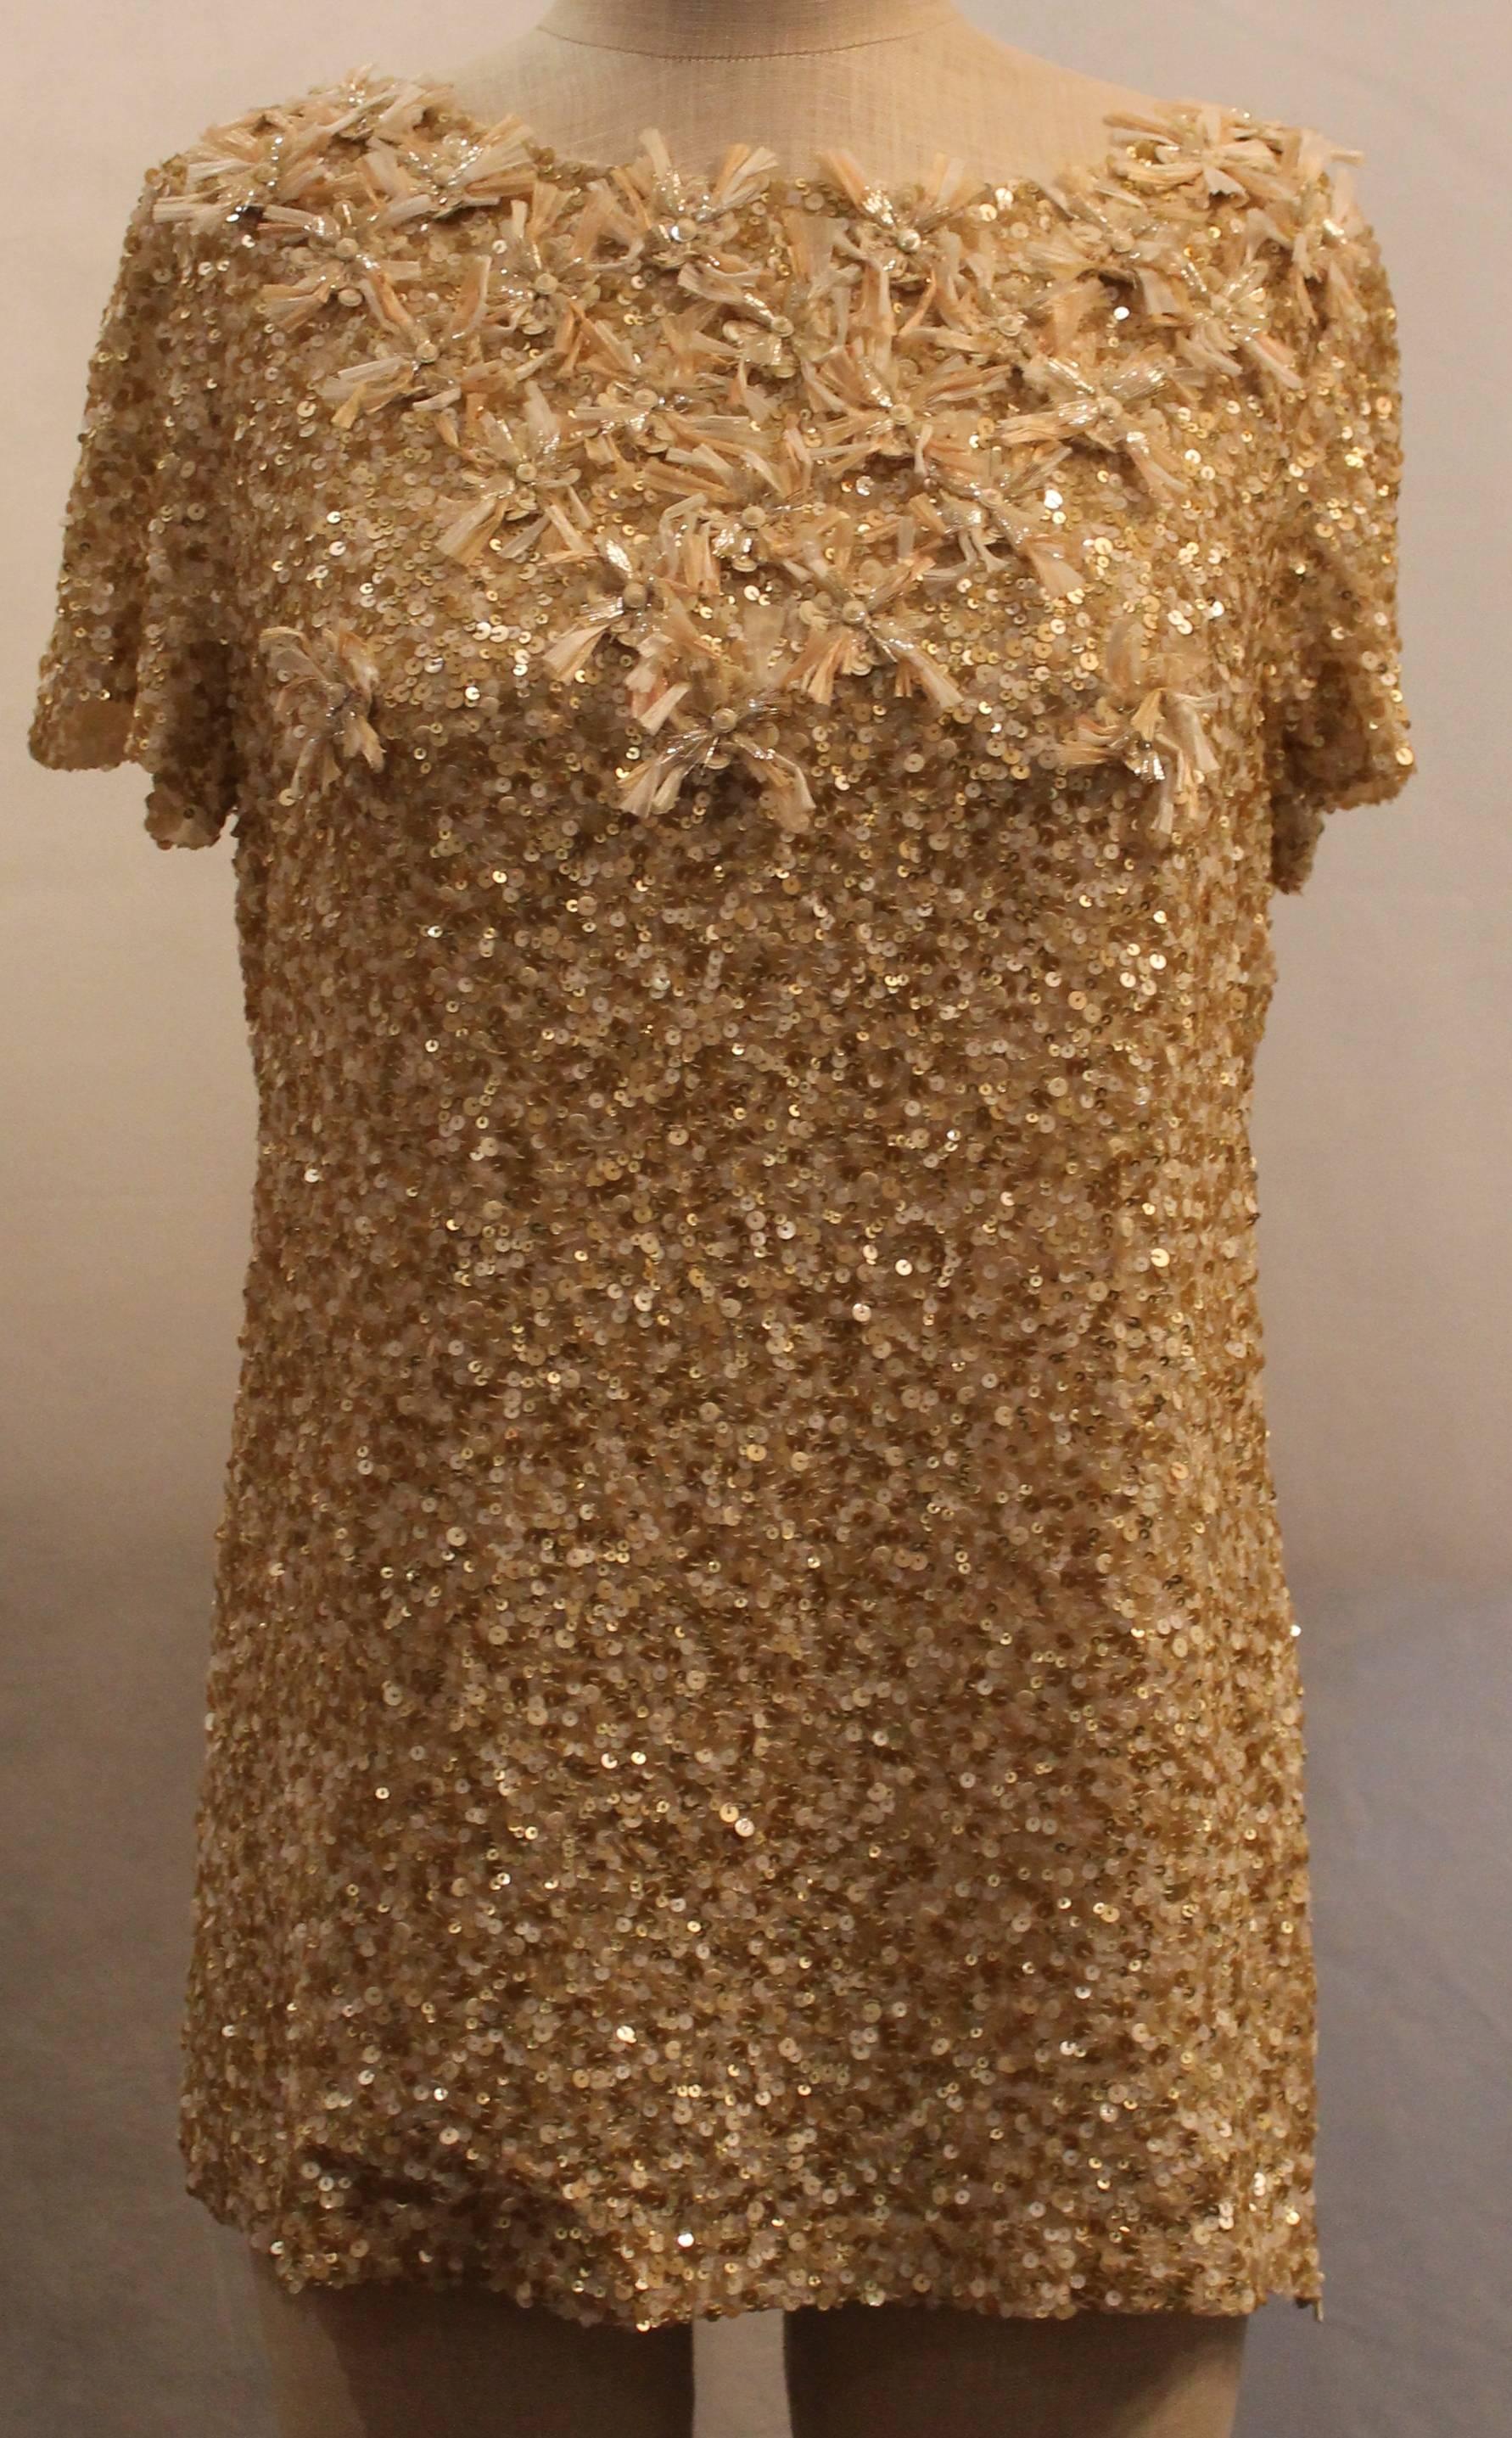 Oscar de la Renta Gold Sequin & Silk Top w/ Floral Fringe - 8  This shirt is in excellent condition. It has a floral fringe detail at the neckline and a side zipper.

Measurements:
Bust: 37